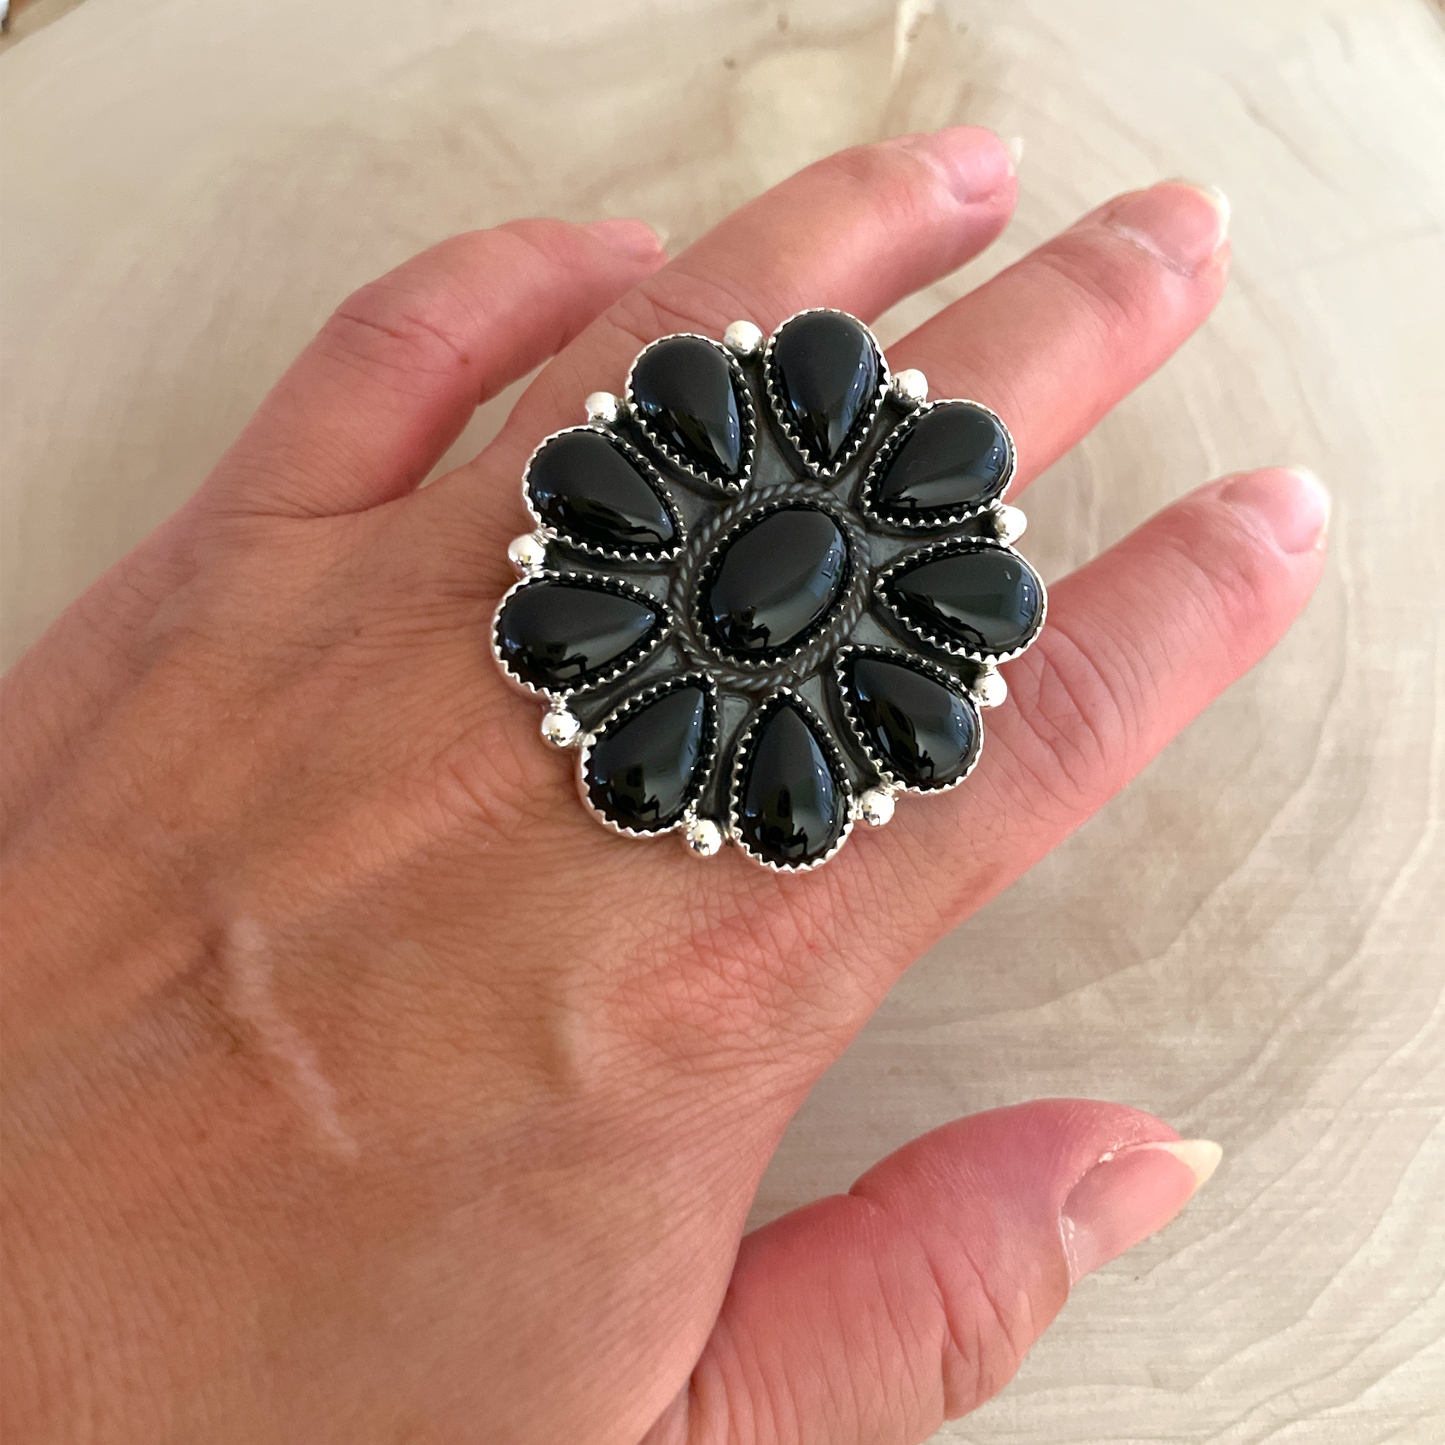 Black Onyx Cluster Ring Size 8 By Phillip Yazzie